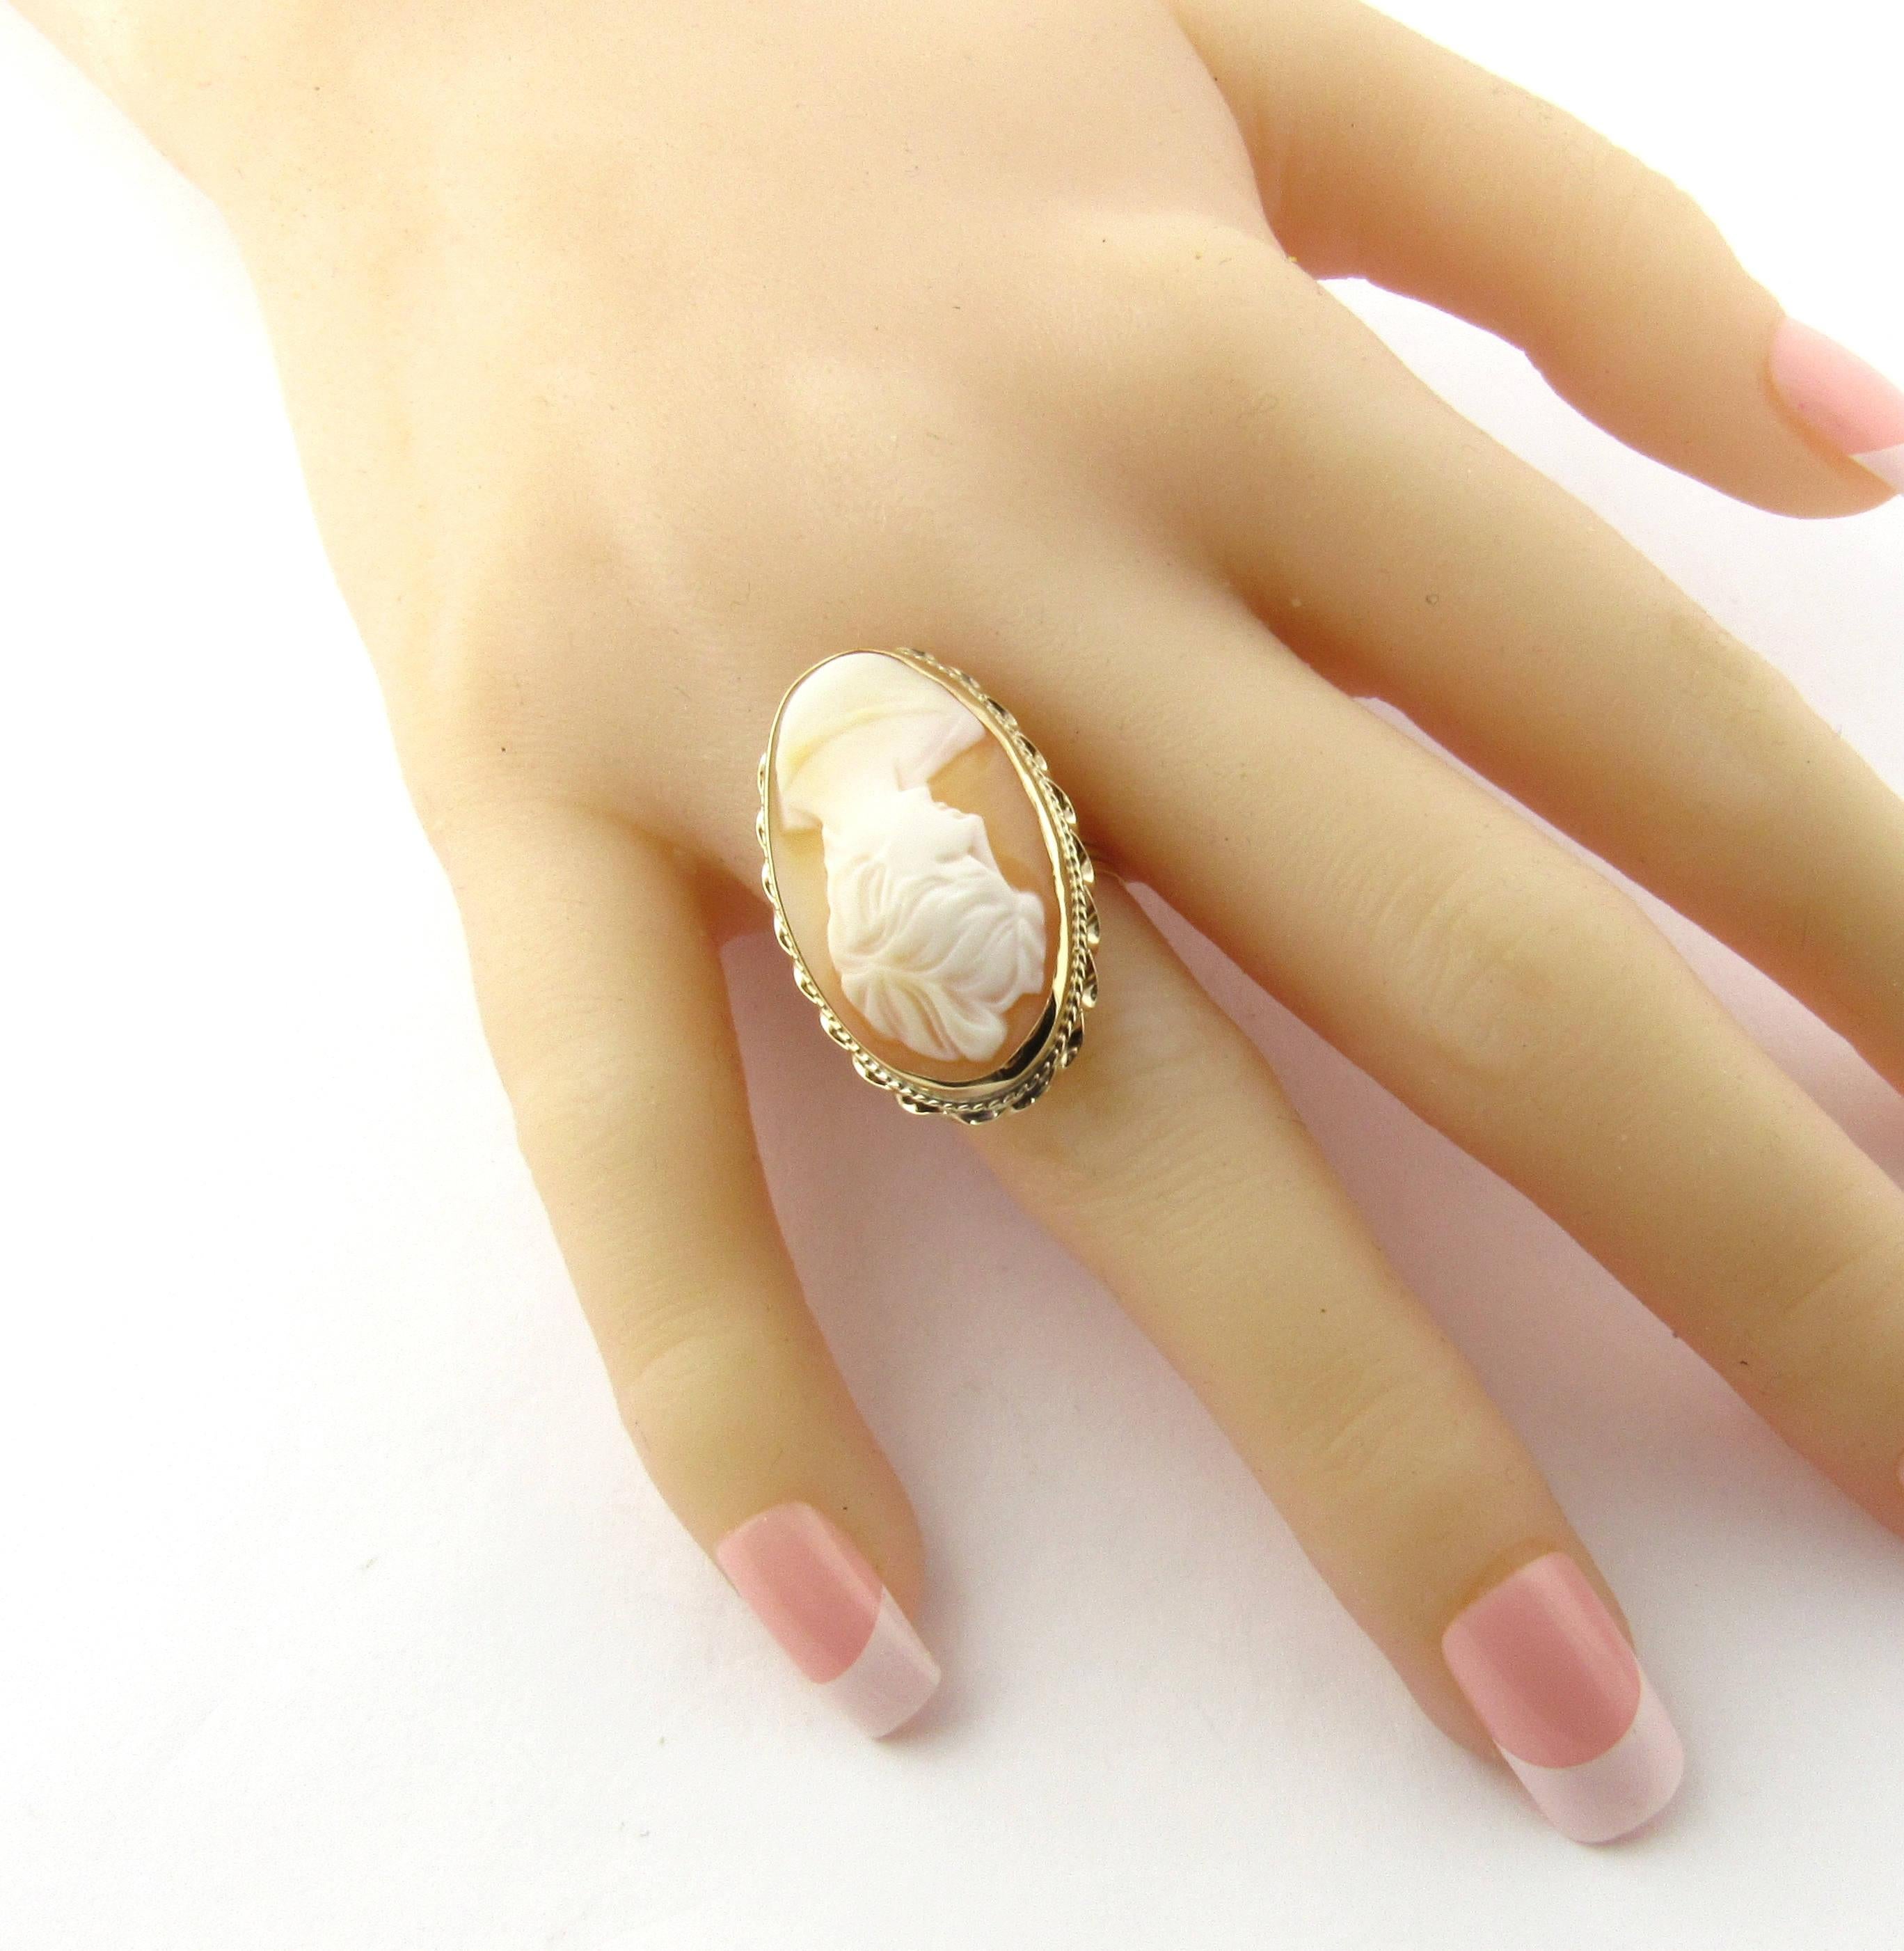 Vintage 14 Karat Yellow Gold Cameo Ring Size 8.5

This elegant cameo ring features a lovely lady in profile framed in meticulously detailed 14K yellow gold. Top of ring measures 32 mm x 18 mm. Shank measures 1 mm.

Ring Size: 8.5

Weight:  4.1 dwt.